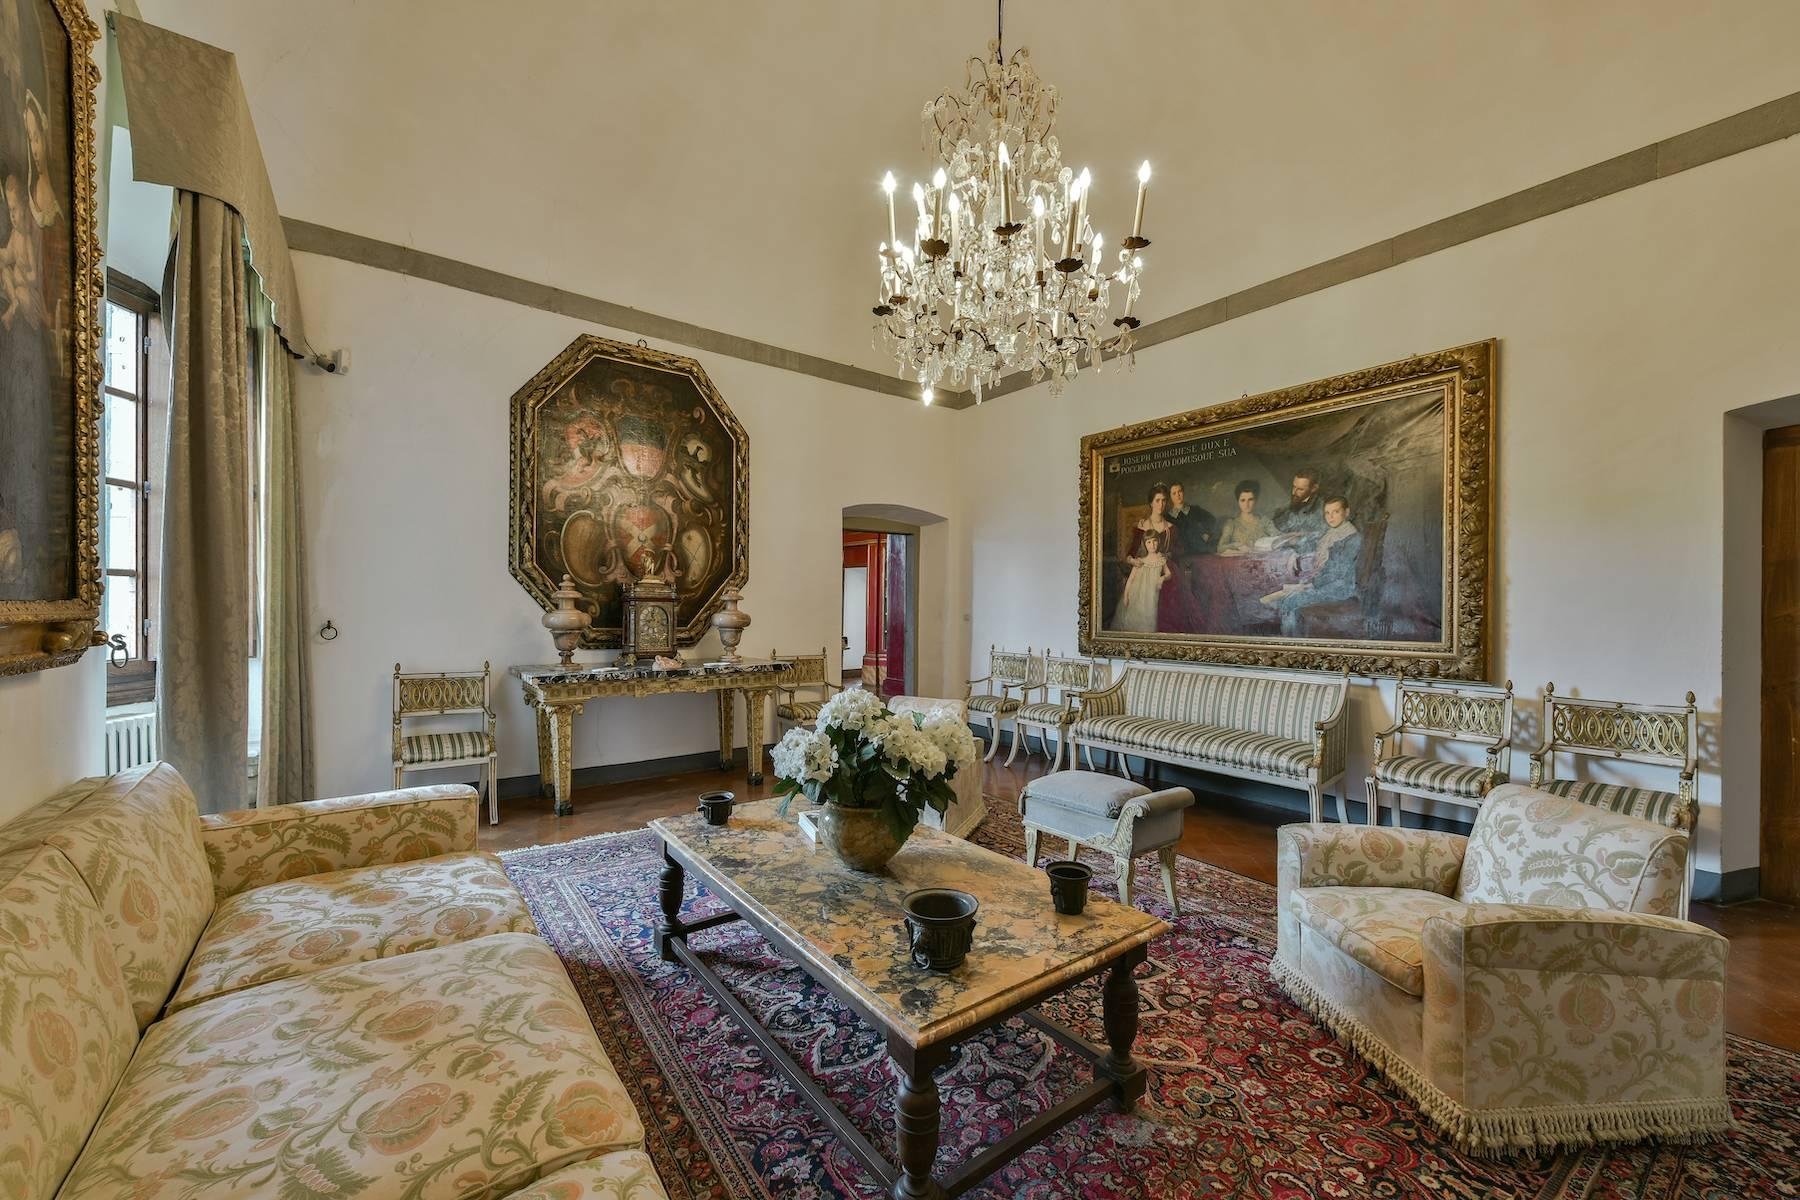 Francis York  Tuscan Villa Owned by Italian Aristocracy Available to Book as a Luxury Villa Rental 7.jpg